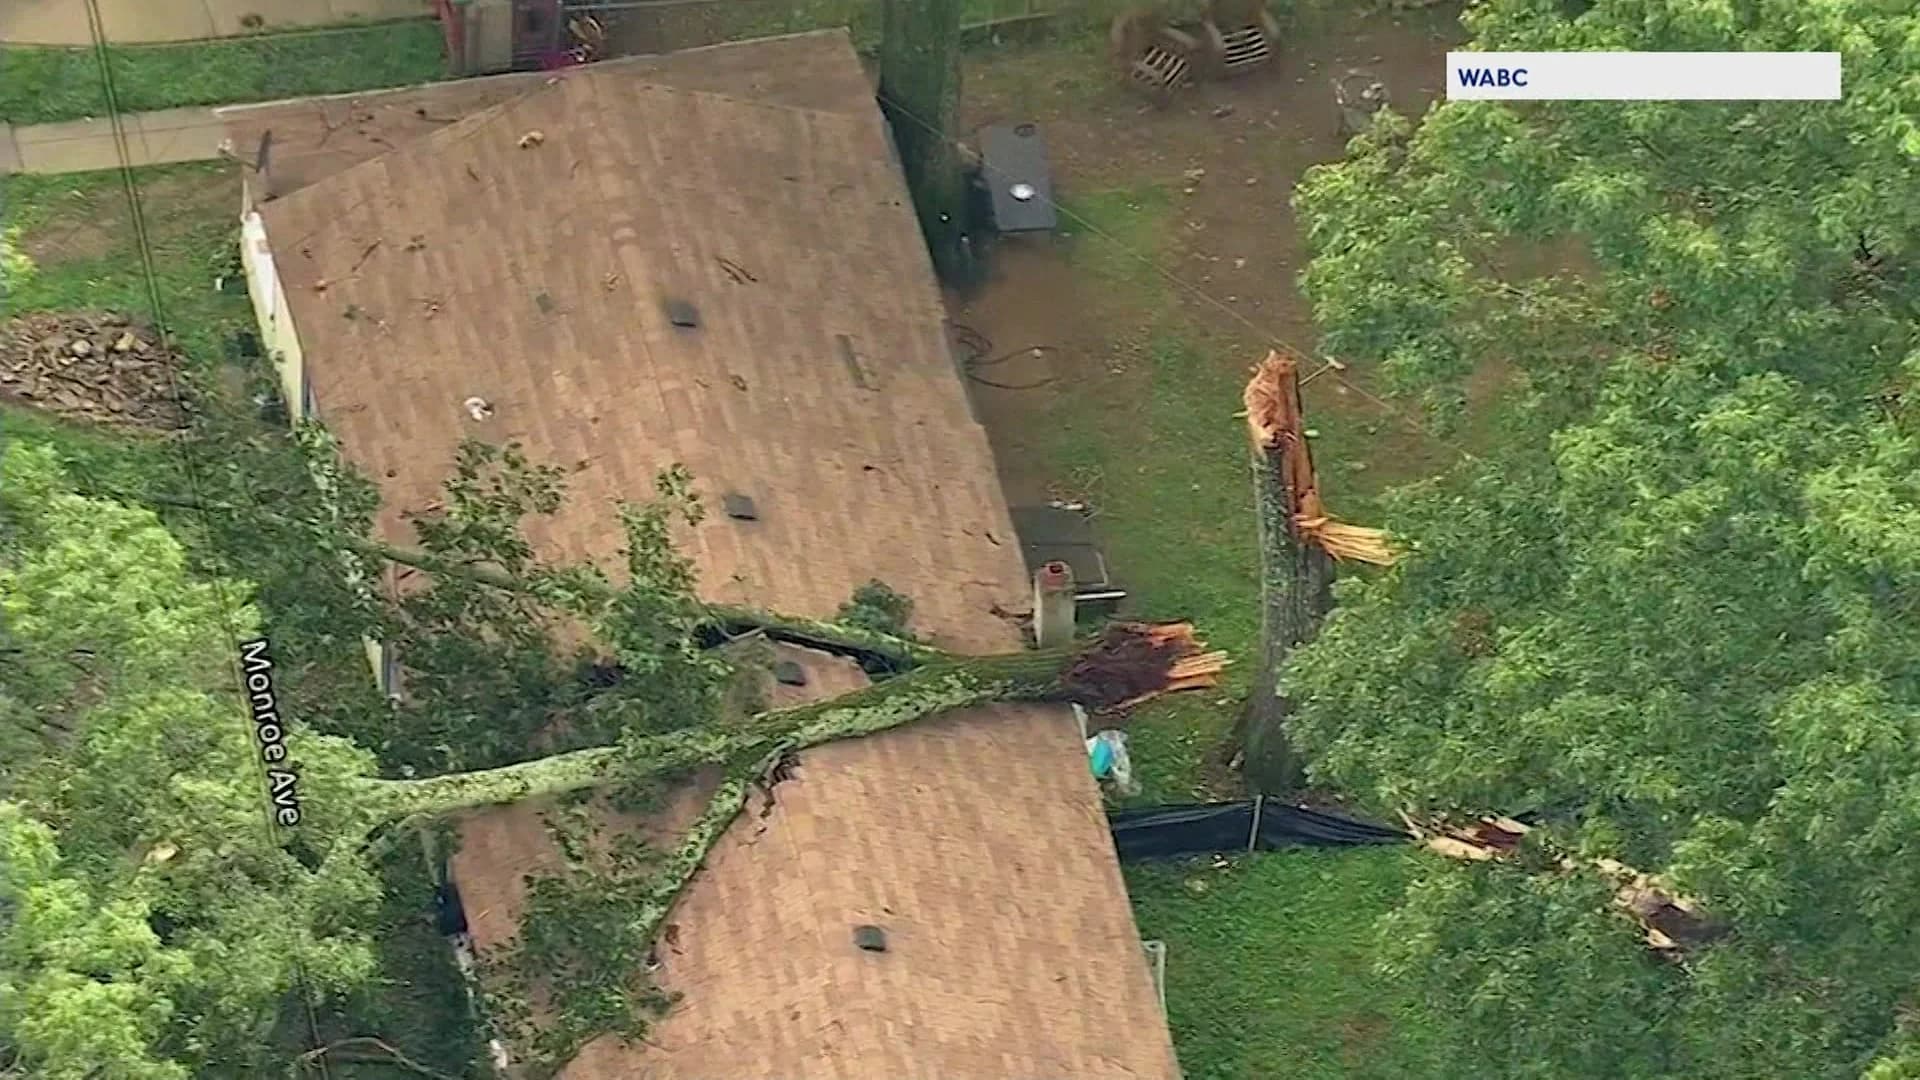 Officials: Families displaced when trees fall near homes in Victory Gardens